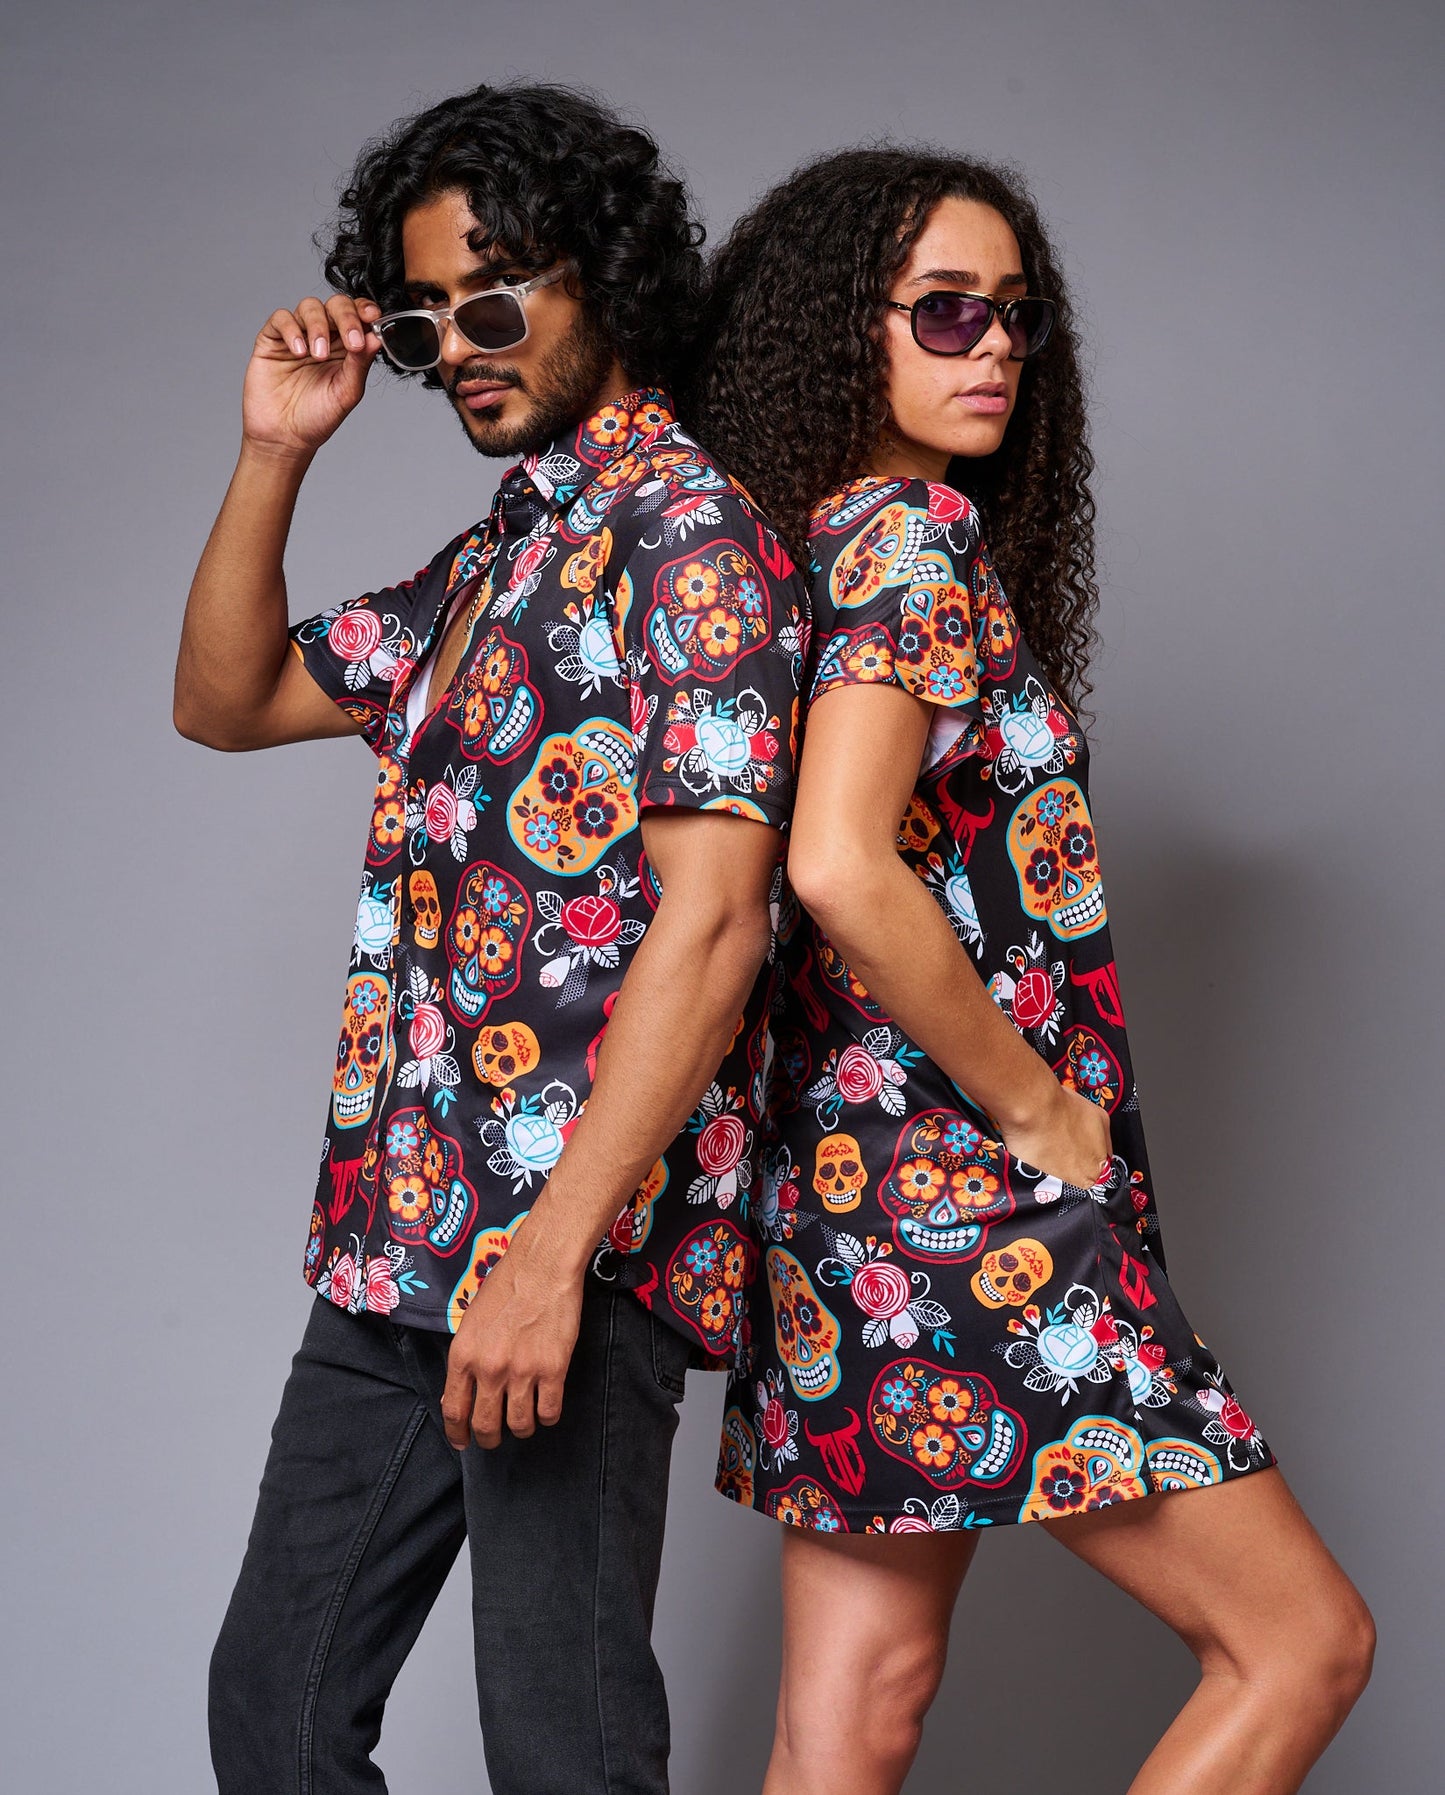 Colourful Skull Printed Couples Coord - Go Devil